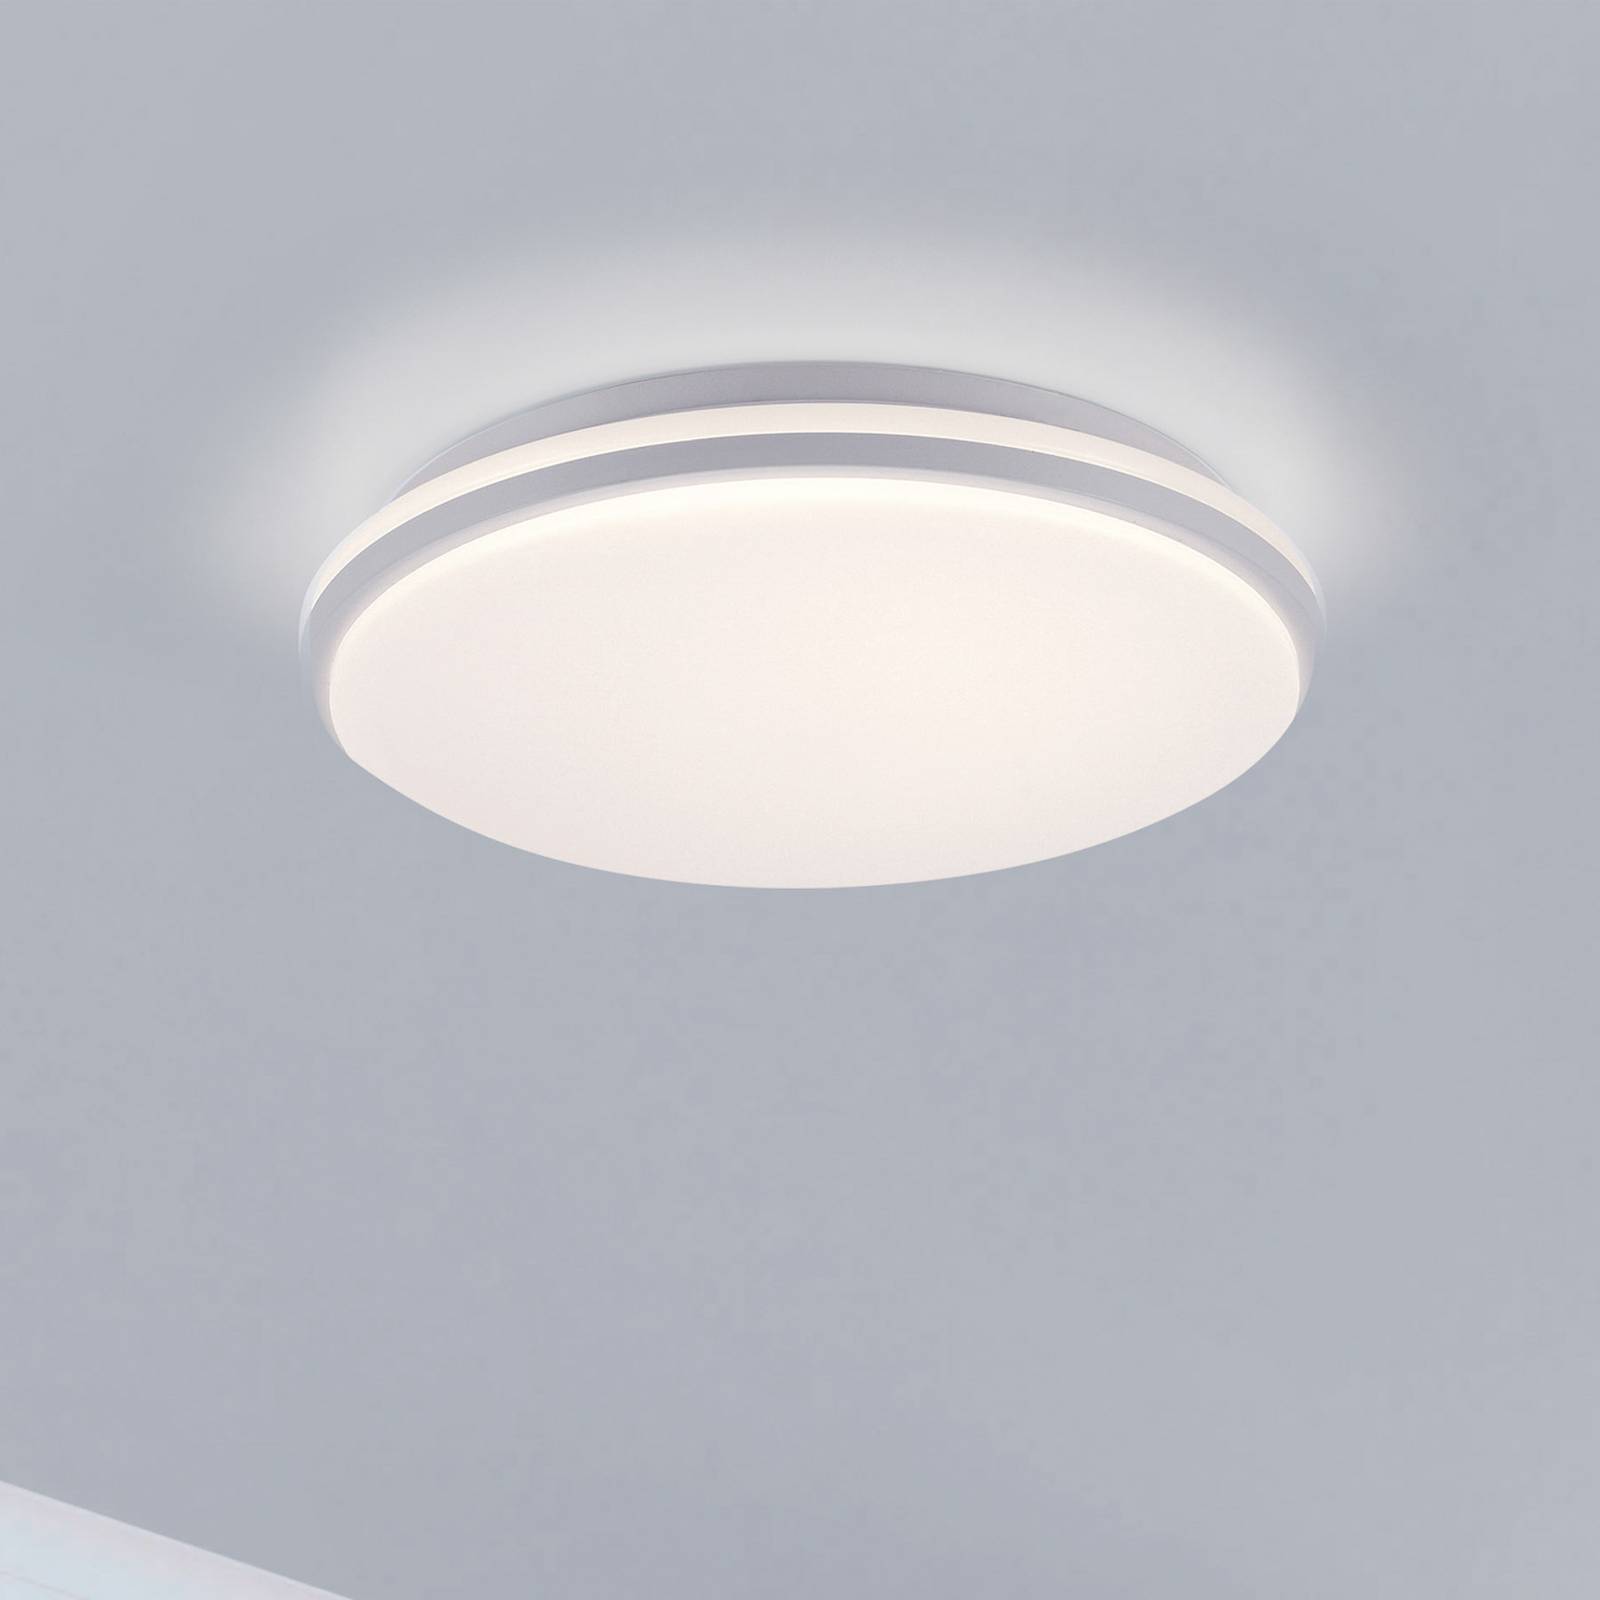 JUST LIGHT. Colin LED plafoniera, dimmer a 3 livelli,  34 cm